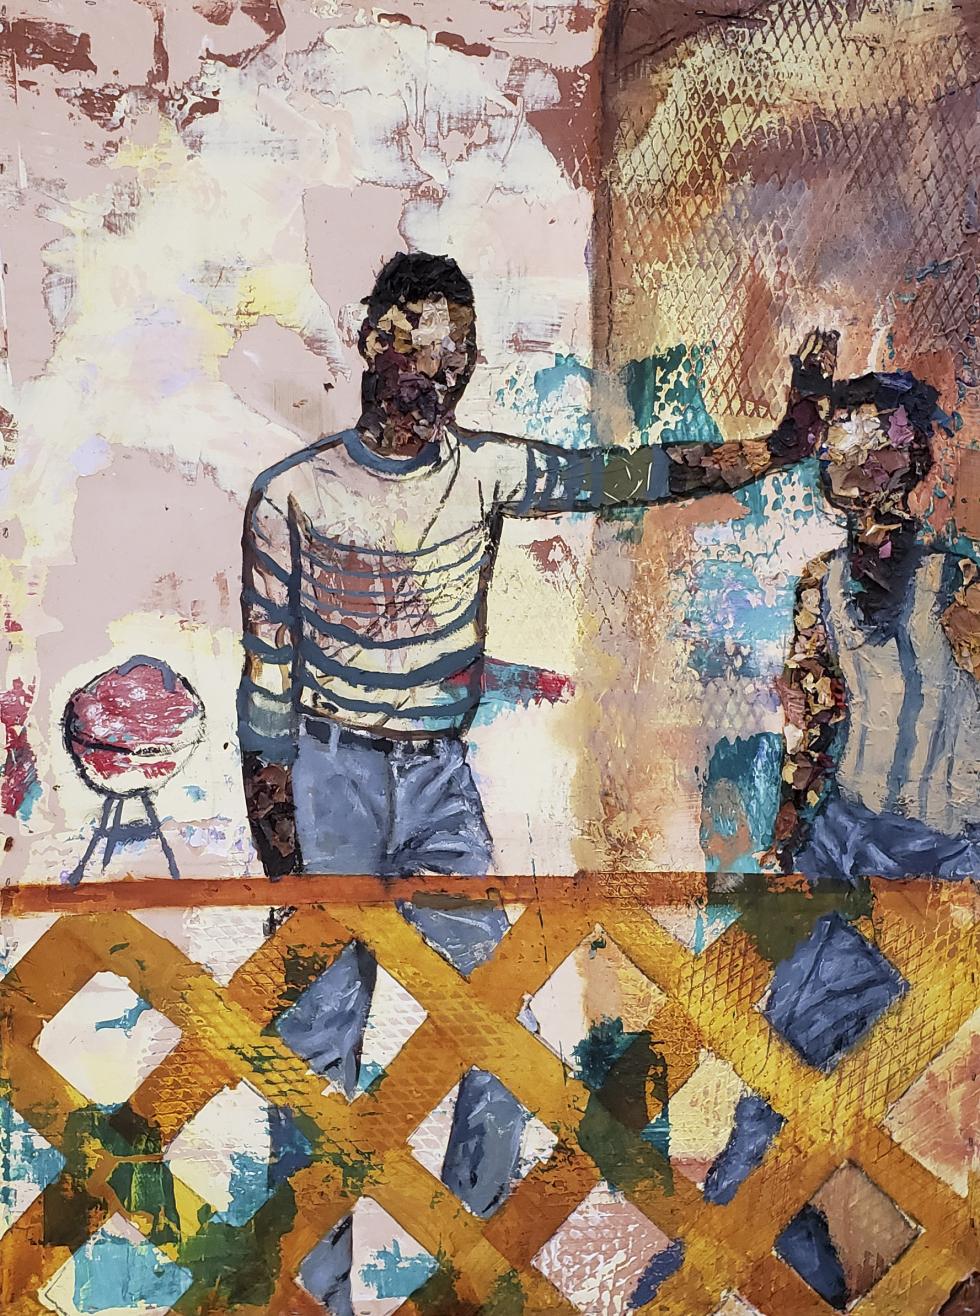 Painting of two people with short hair outside looking at each other roughly painted with different colors.